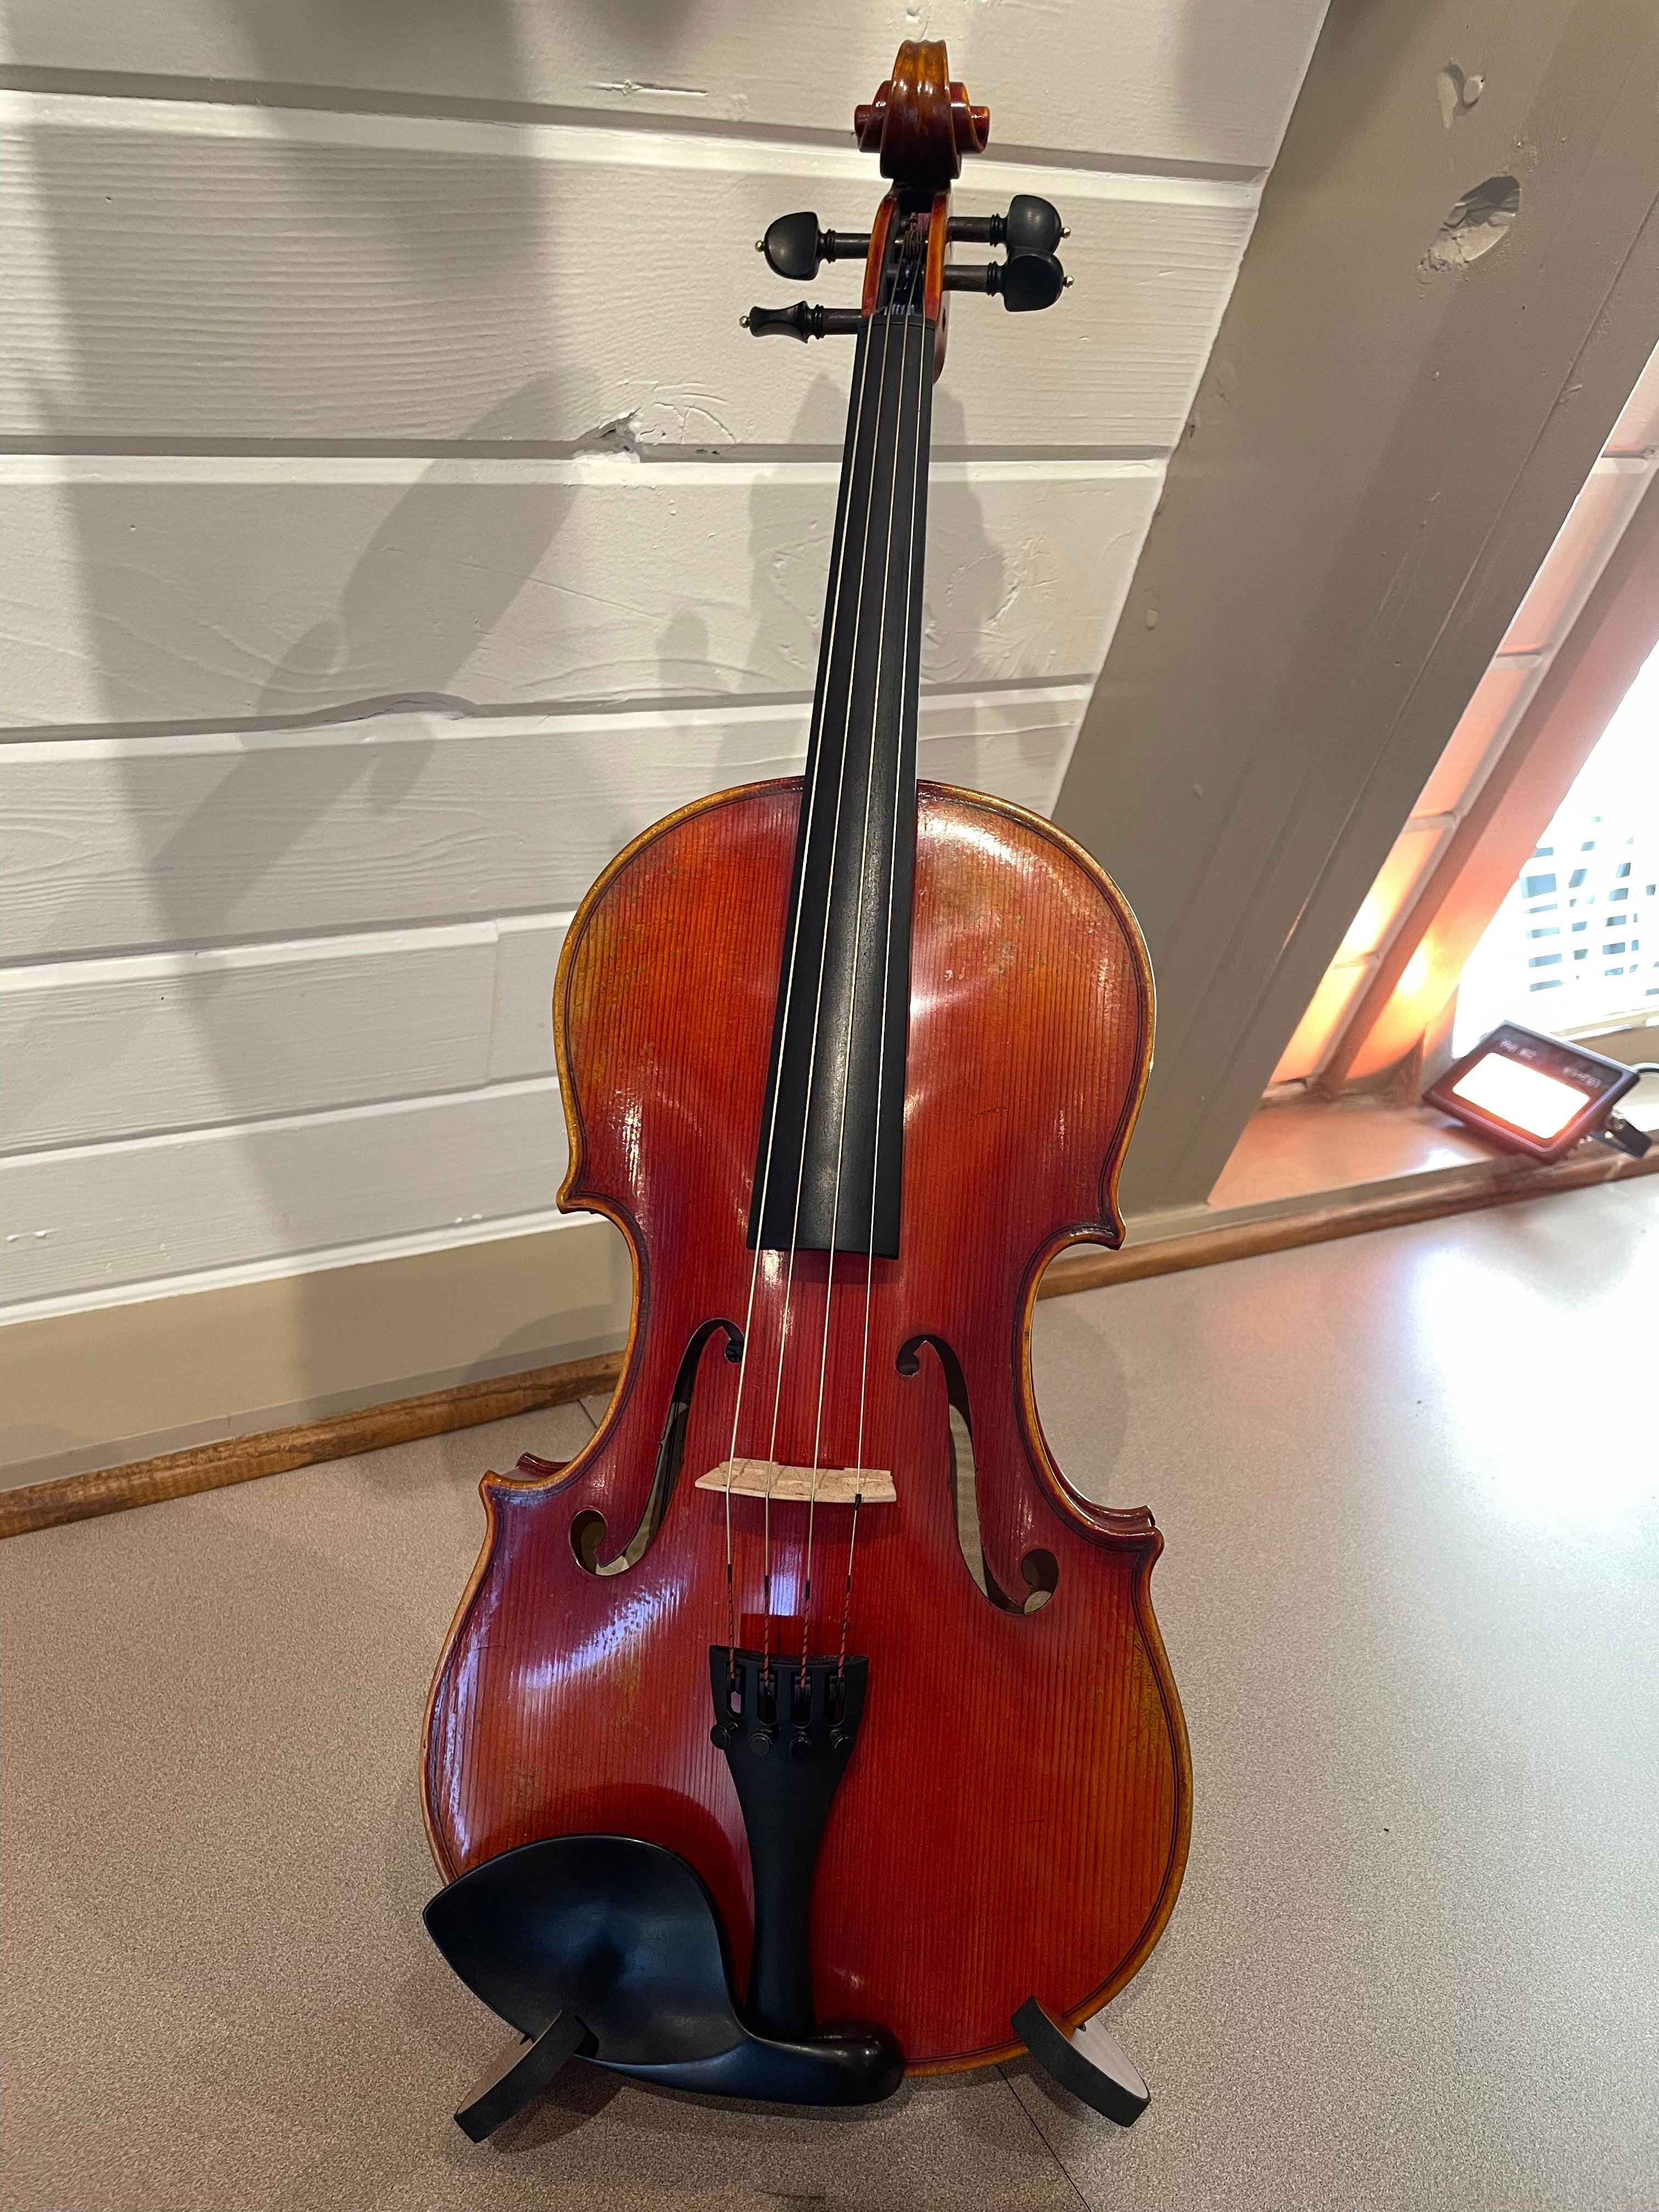 Upgrade 15.5" Viola outfit